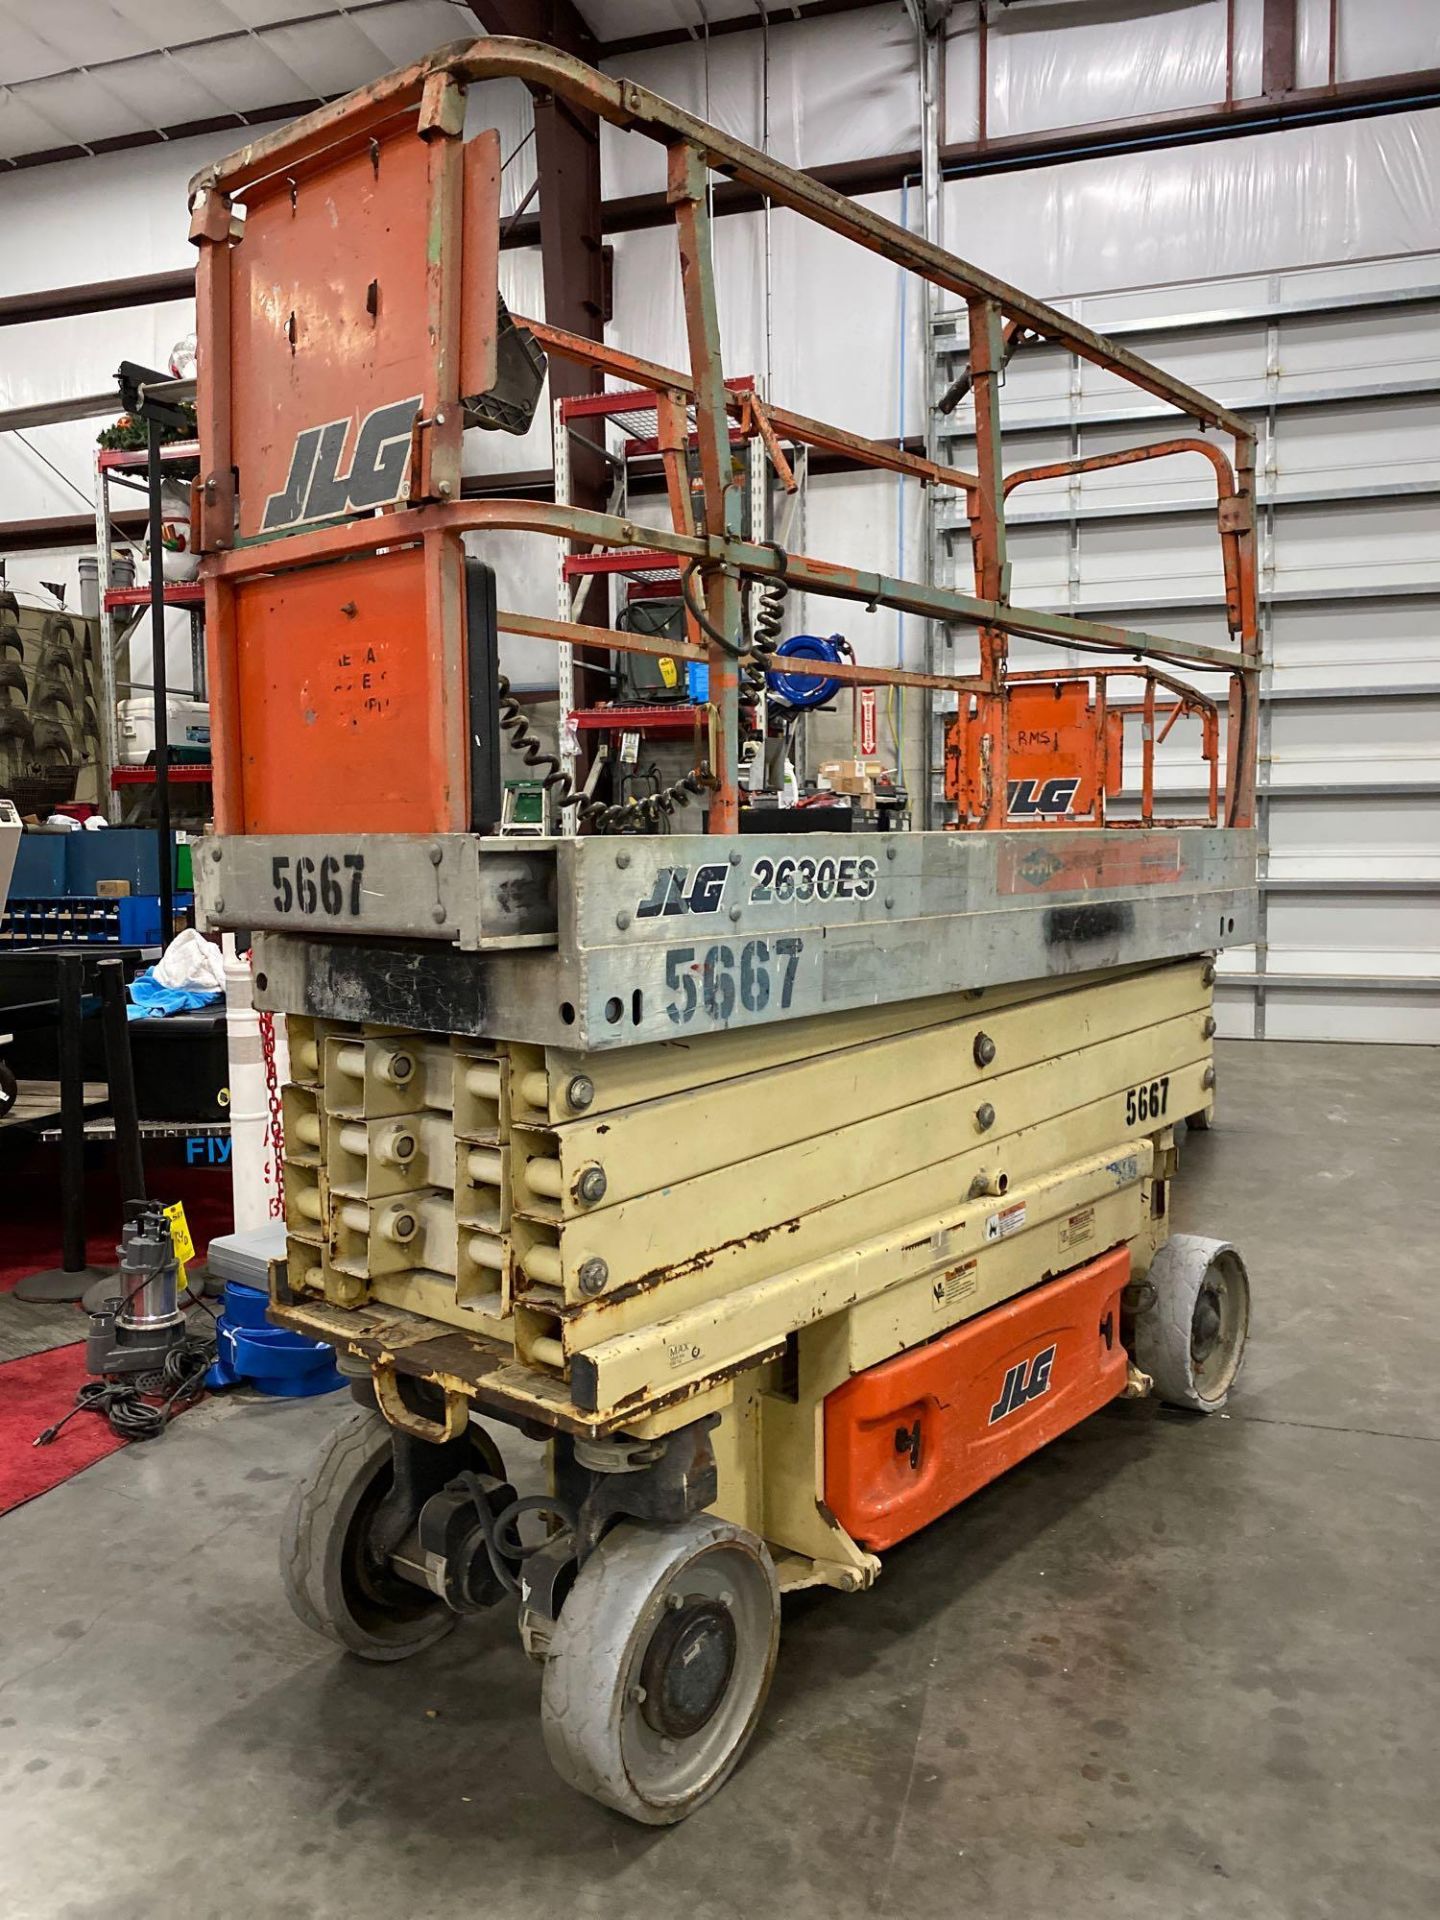 JLG 2630ES ELECTRIC SCISSOR LIFT, SELF PROPELLED, 26' PLATFORM HEIGHT, BUILT IN BATTERY CHARGER, RUN - Image 3 of 14